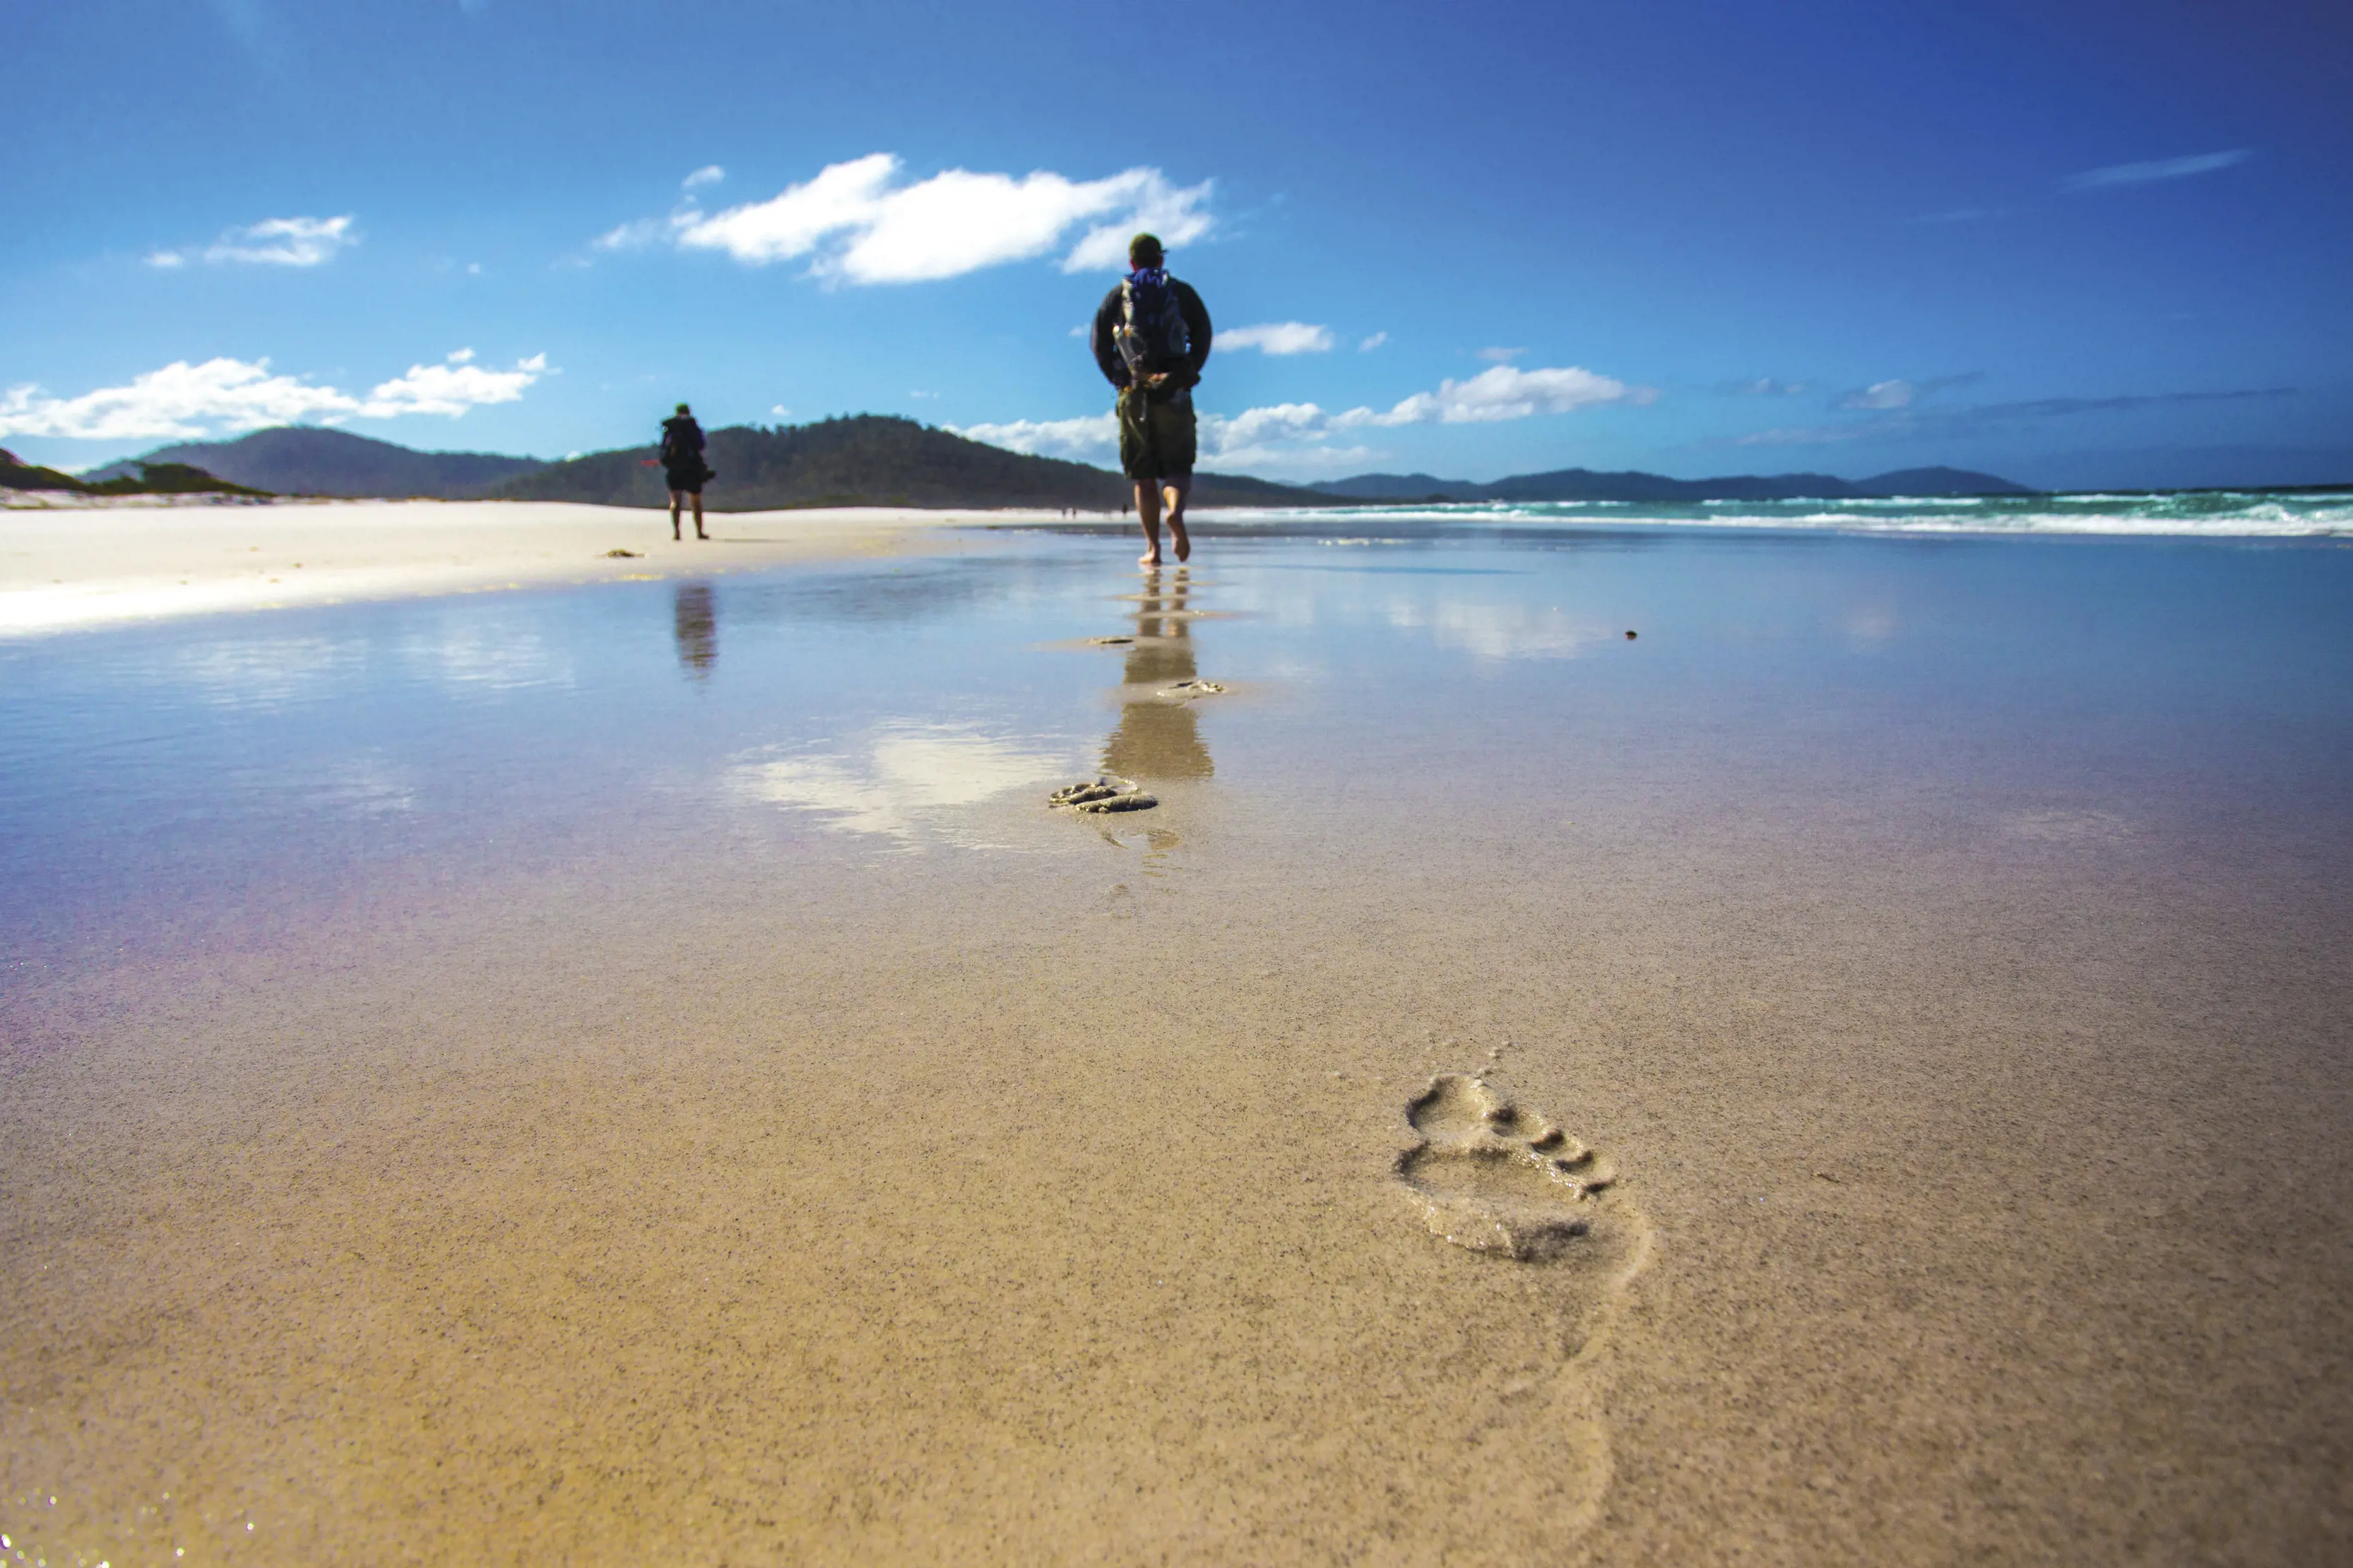 Footprints in the sand and people in the distance on The Freycinet Experience Walk